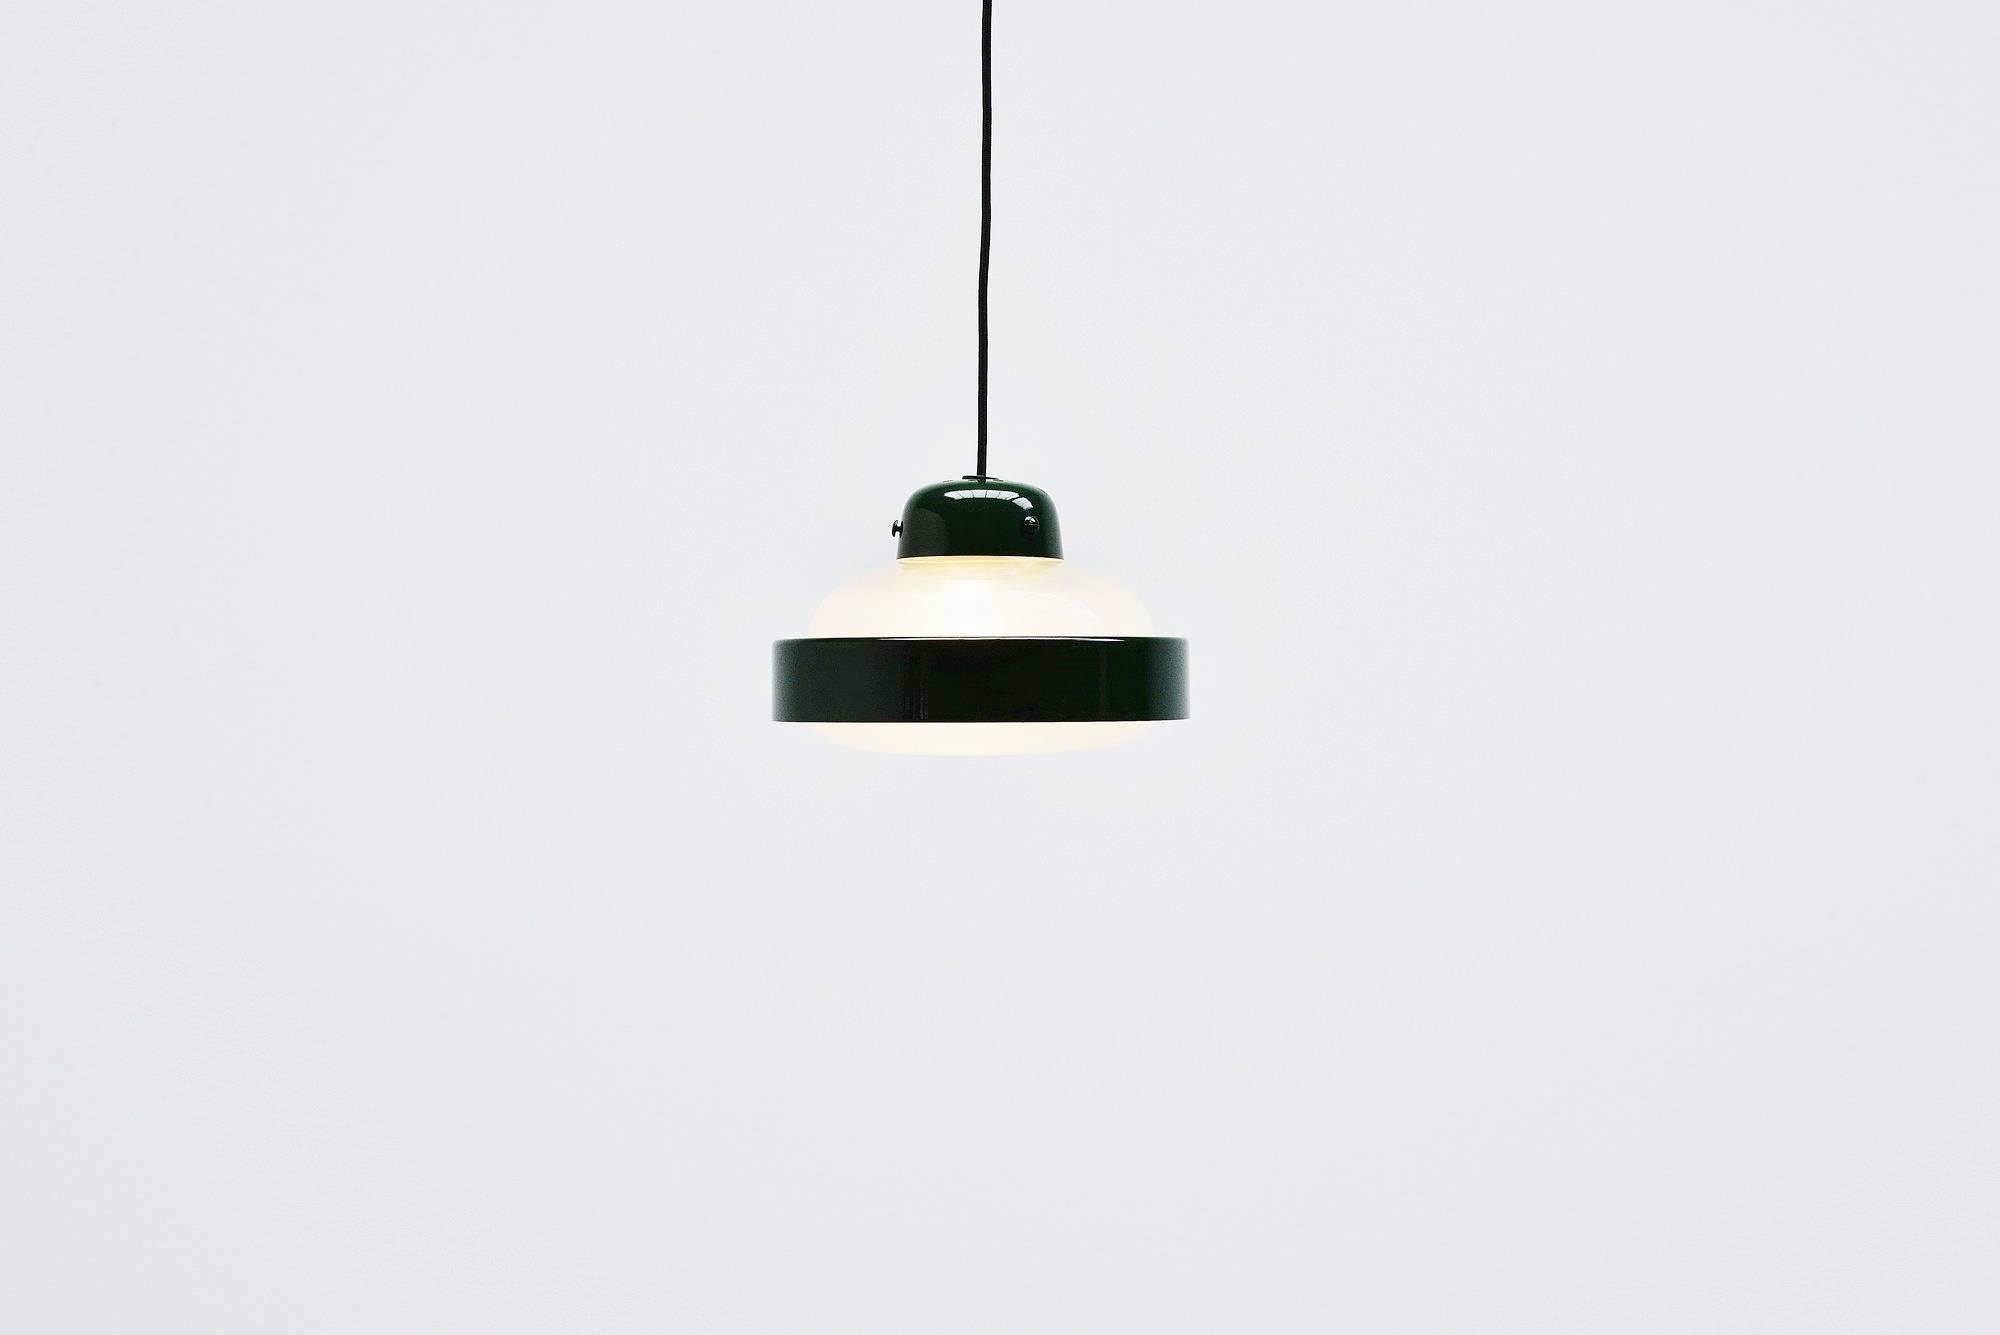 Rare pendant lamp model 32102p designed by Gino Sarfatti, manufactured by Arteluce, Italy, 1959. This light exists in three parts, a diffuser in opaline glass, reflective supporting ring in green lacquered aluminium, ceiling fitting lacquered green.